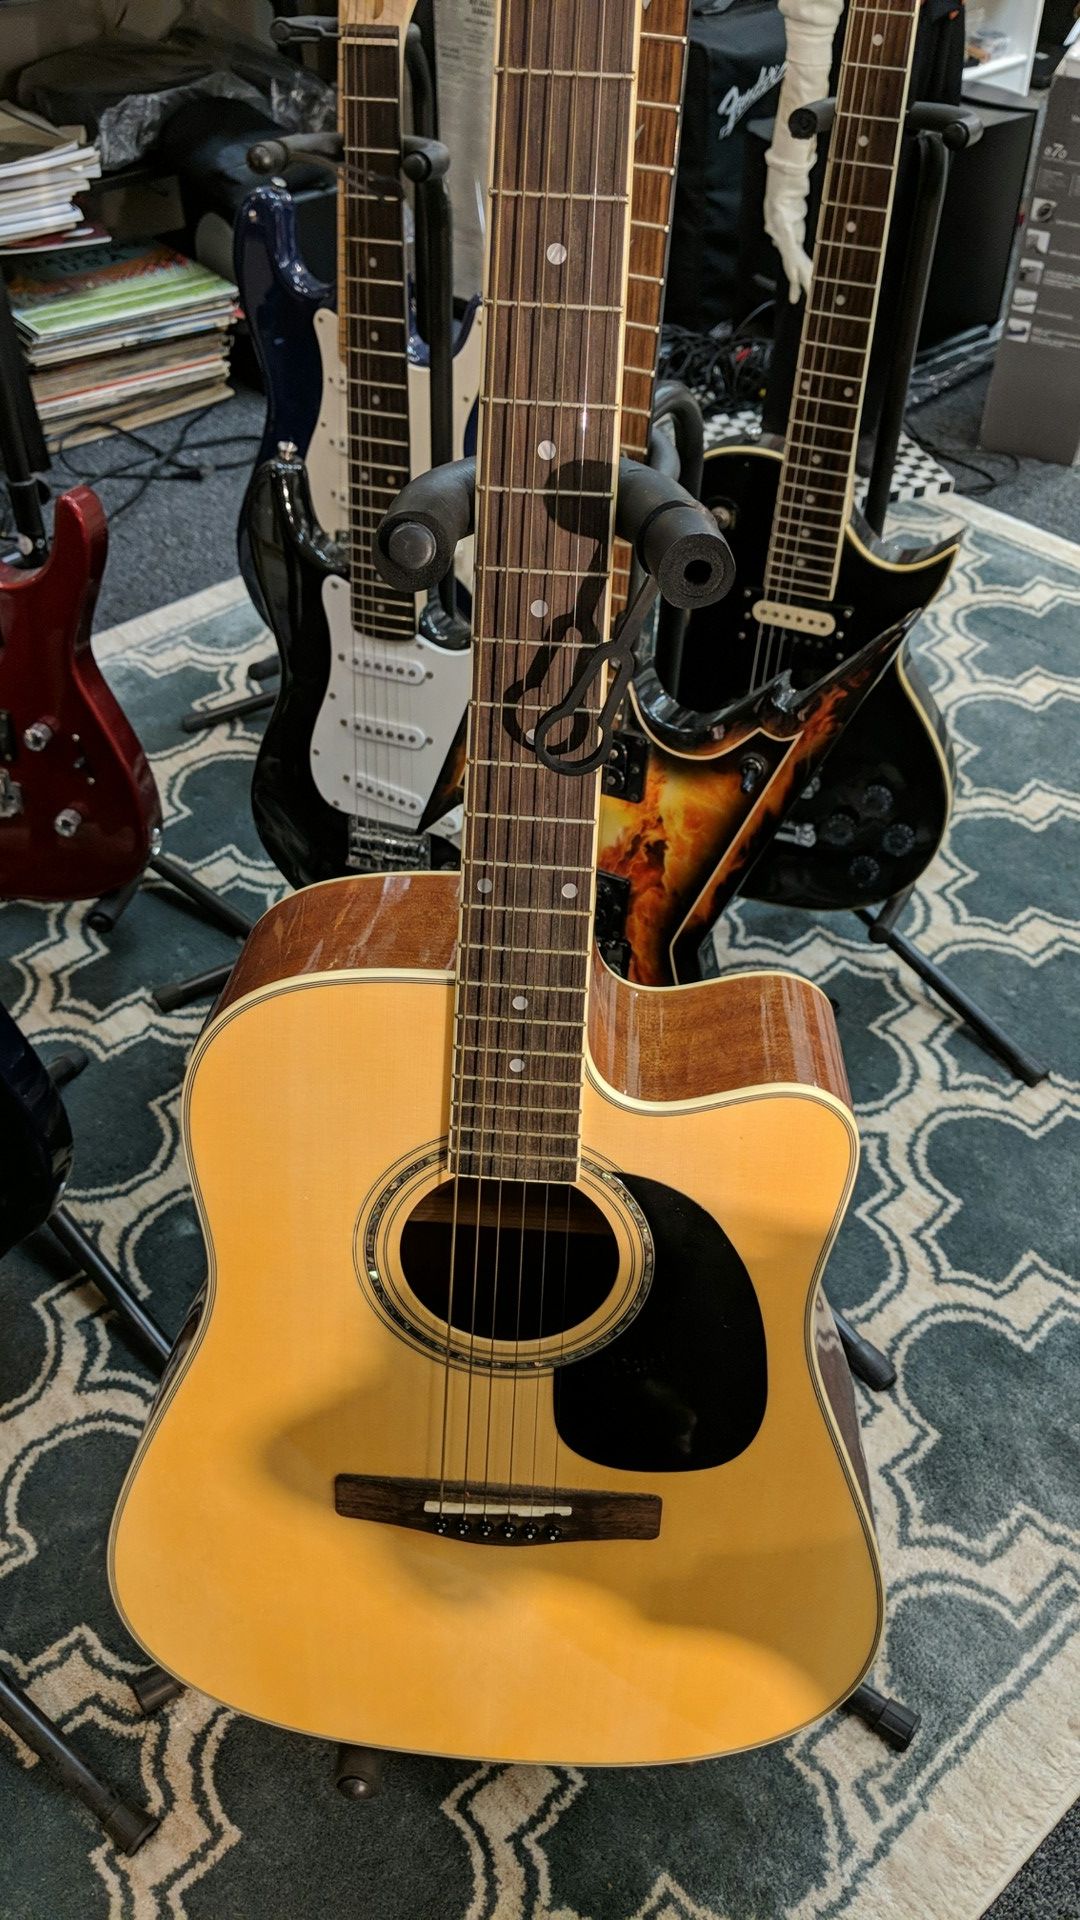 MITCHELL ACOUSTIC GUITAR